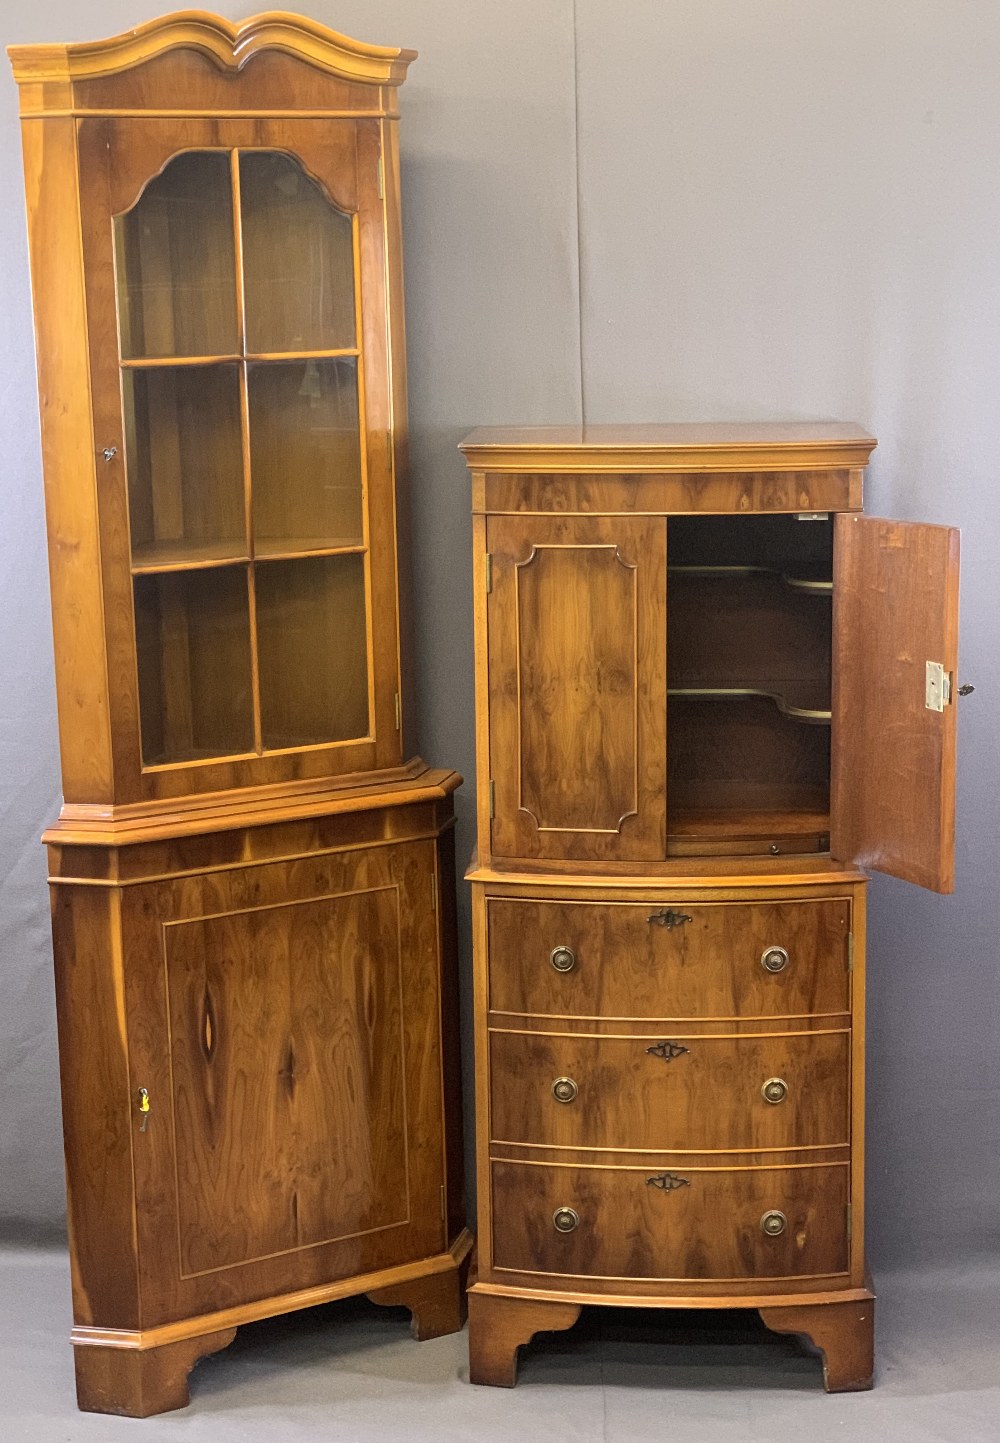 REPRODUCTION YEW WOOD PARLOUR FURNITURE, TWO ITEMS to include a bow fronted cocktail cabinet with